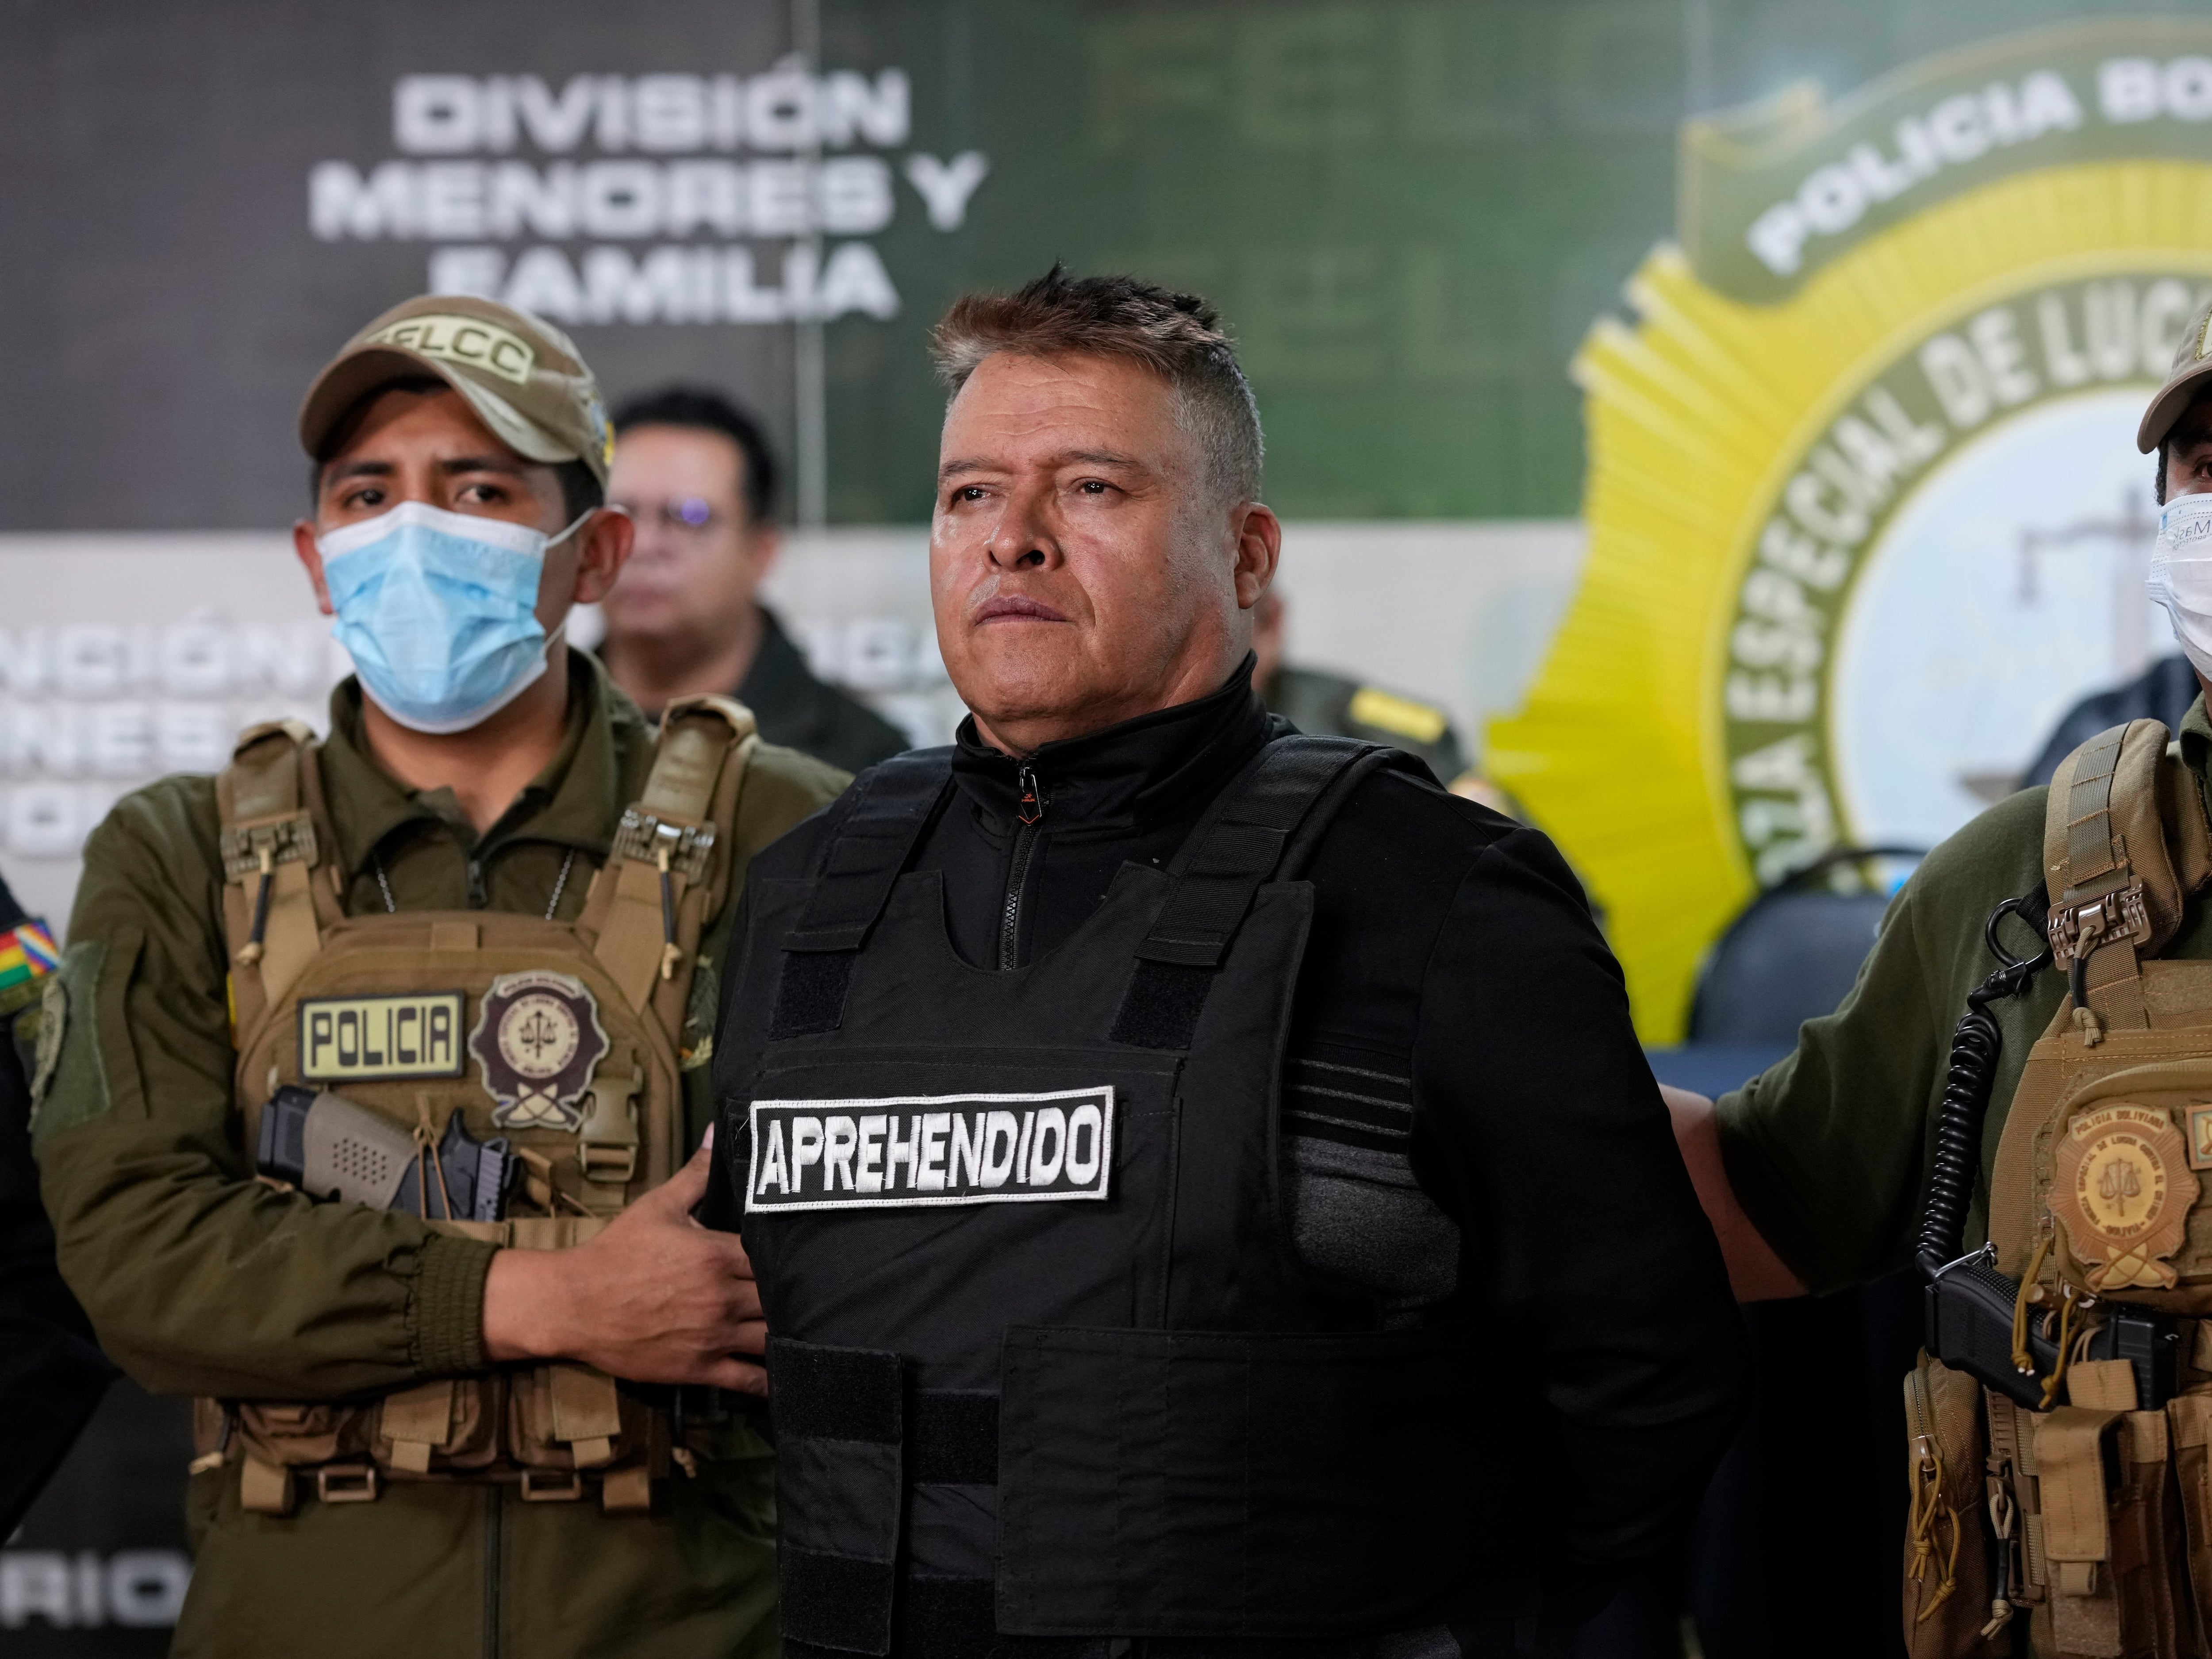 Bolivian general arrested after apparent failed coup attempt